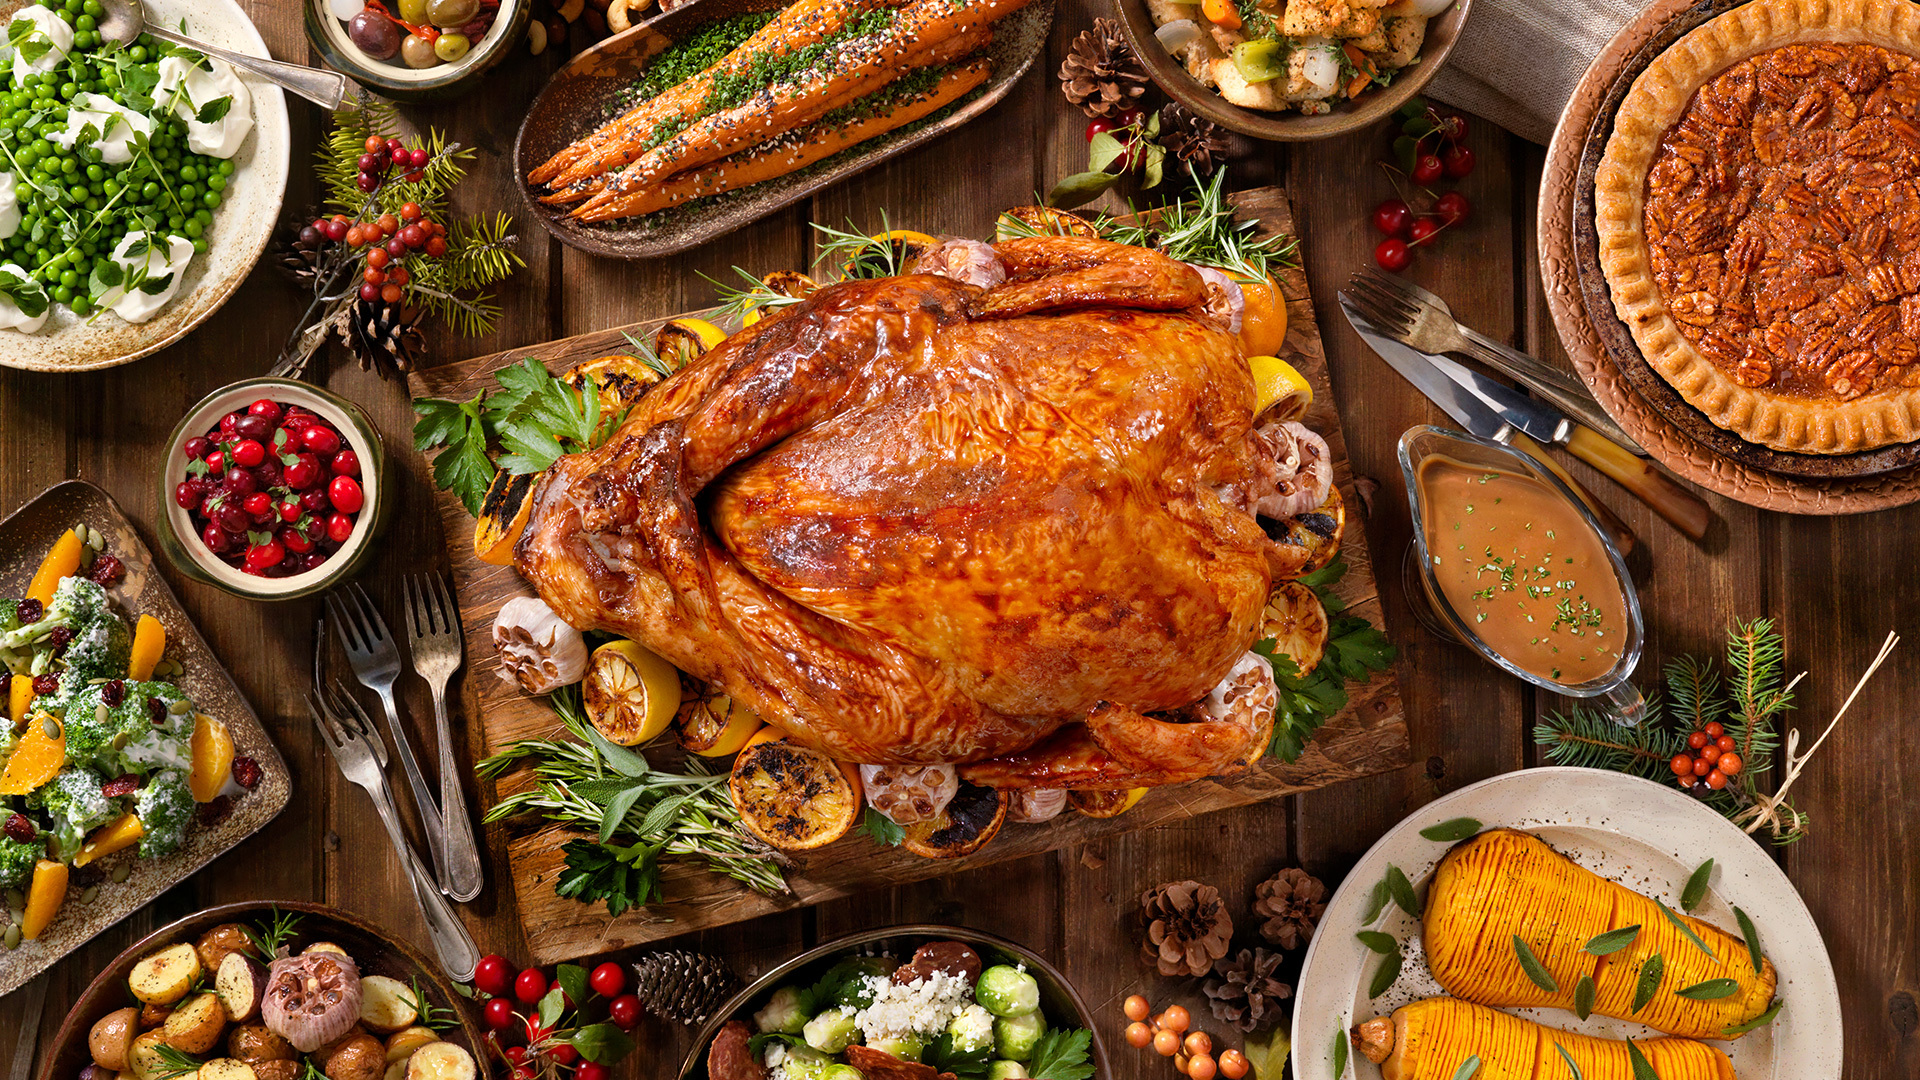 Savory and sweet treats are everywhere this season. Here’s how to enjoy the holidays while eating your favorite foods.